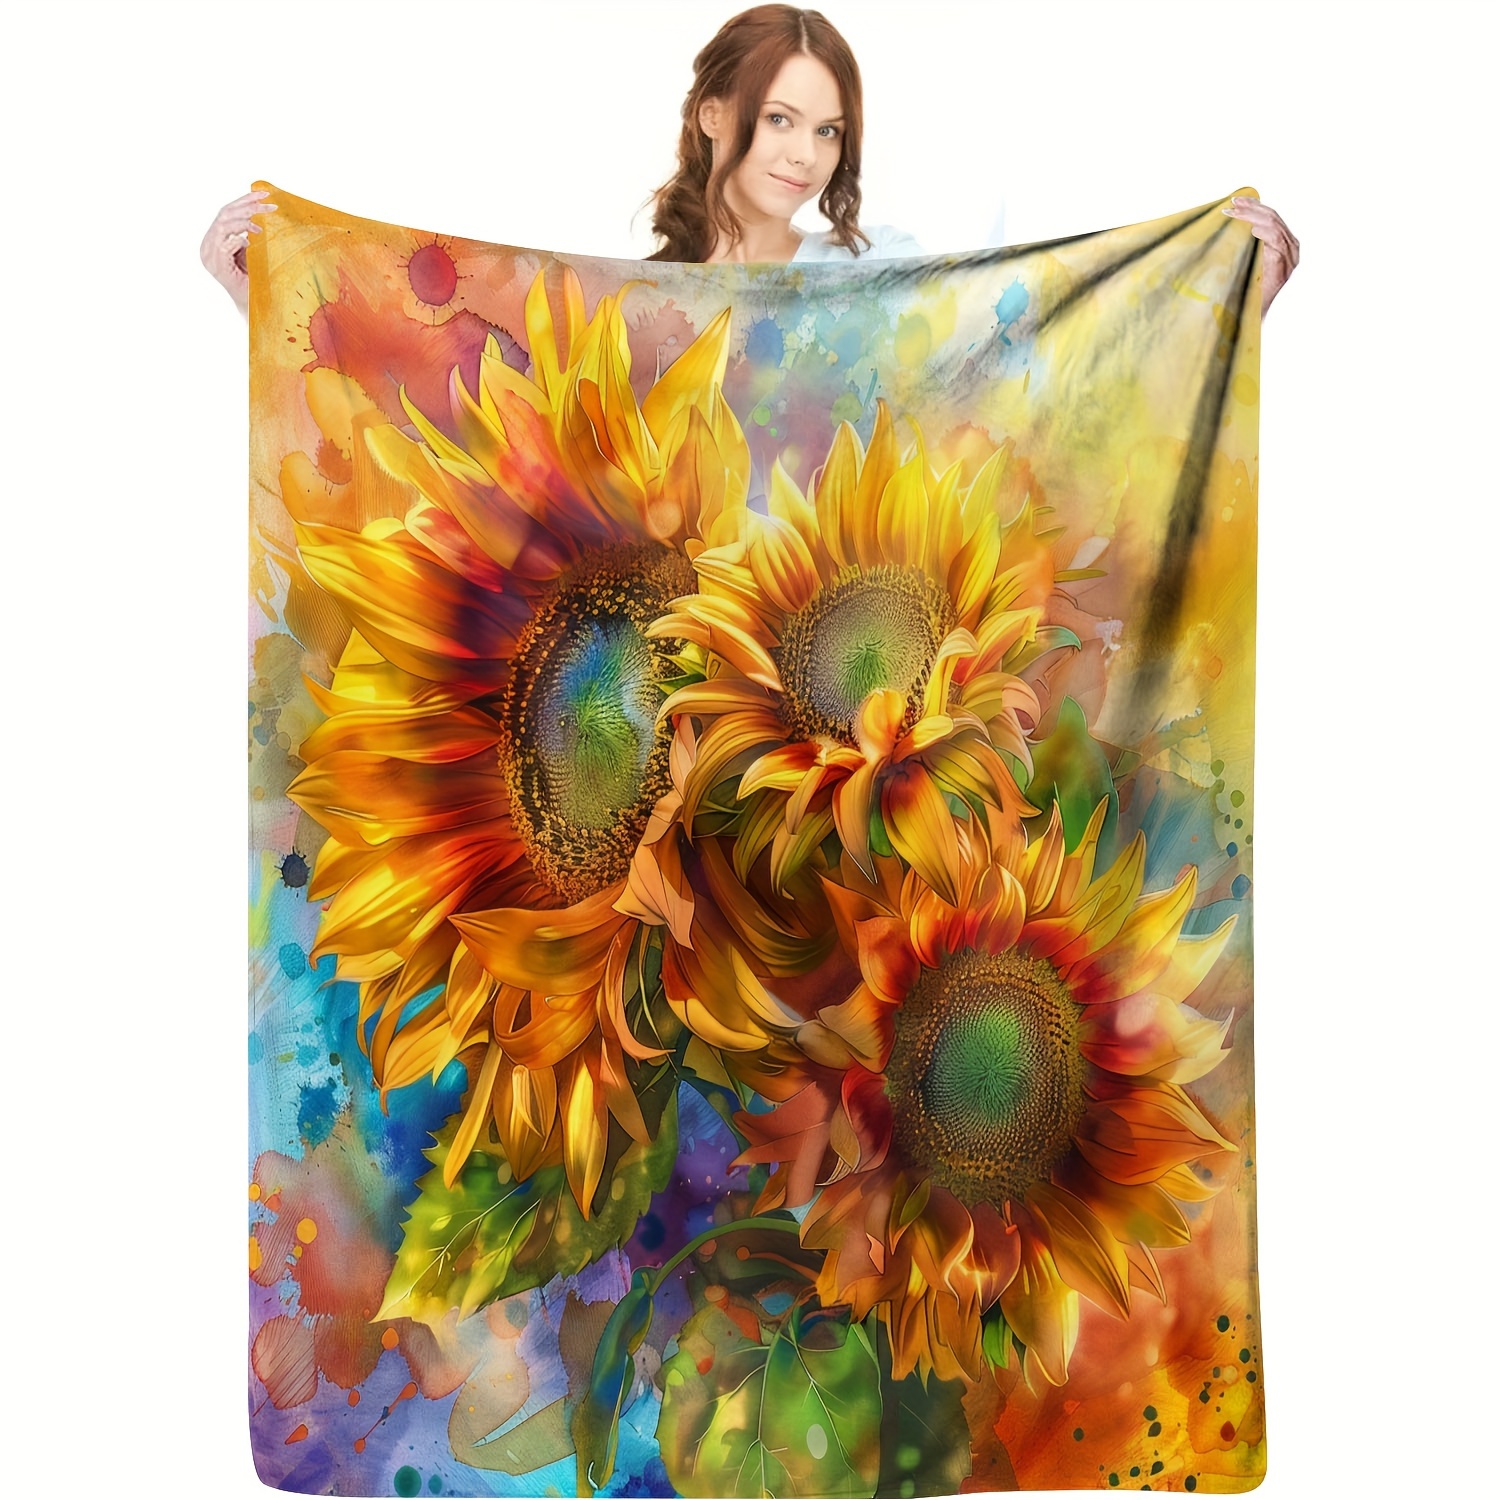 

Style Sunflower Throw Blanket - Vibrant Floral Pattern Knitted Flannel Fleece, Soft Cozy All Seasons Cover - 100% Polyester Embellished Decorative Gift Blanket